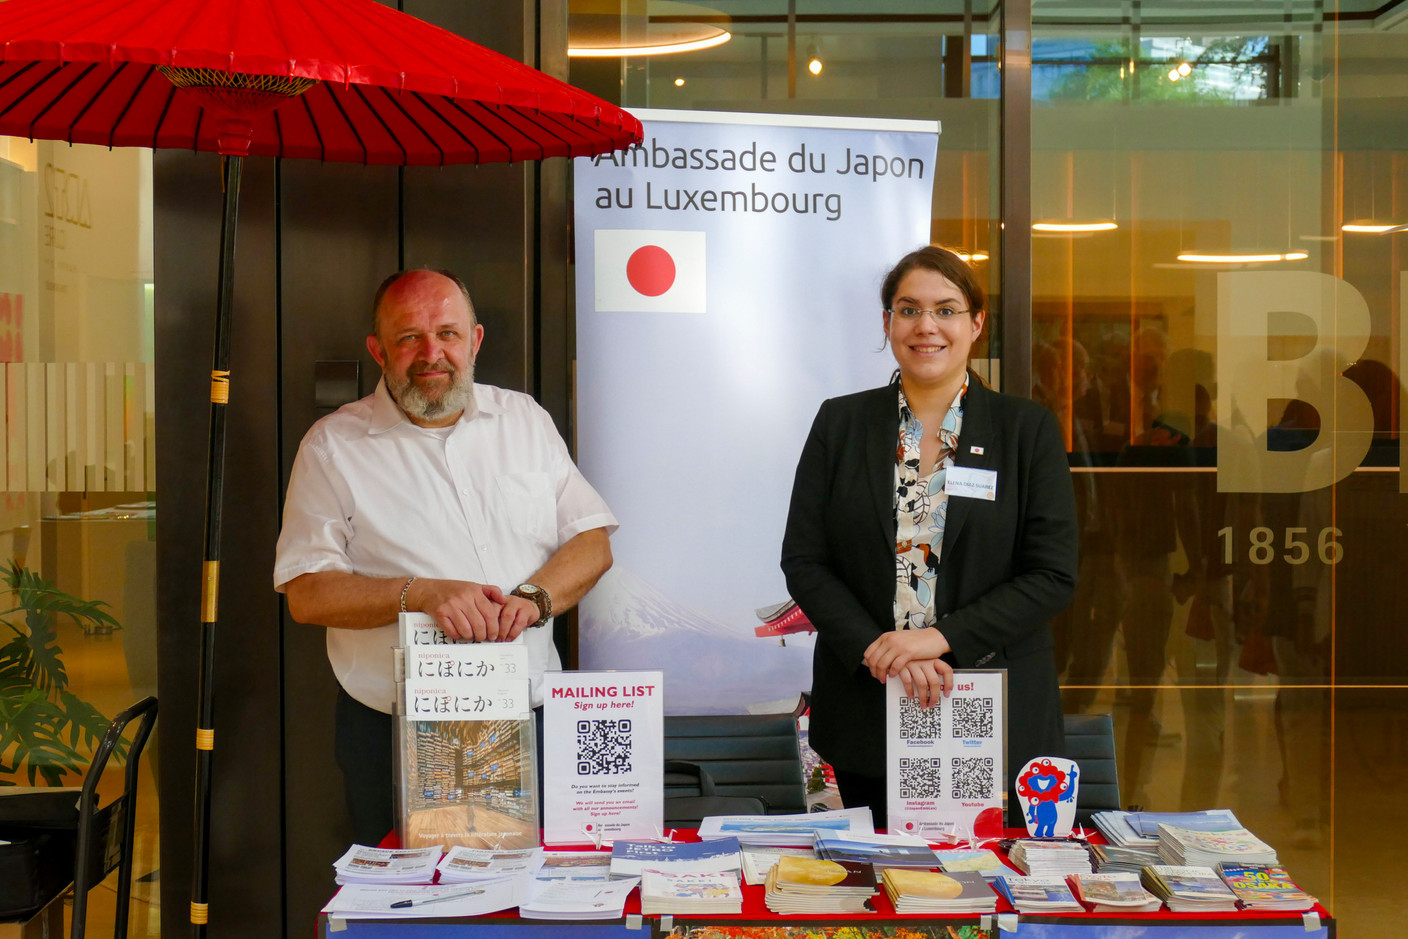 Elena Diaz Suarez (right), Embassy of Japan booth. Photo: Rotary Club Luxembourg Hearts 